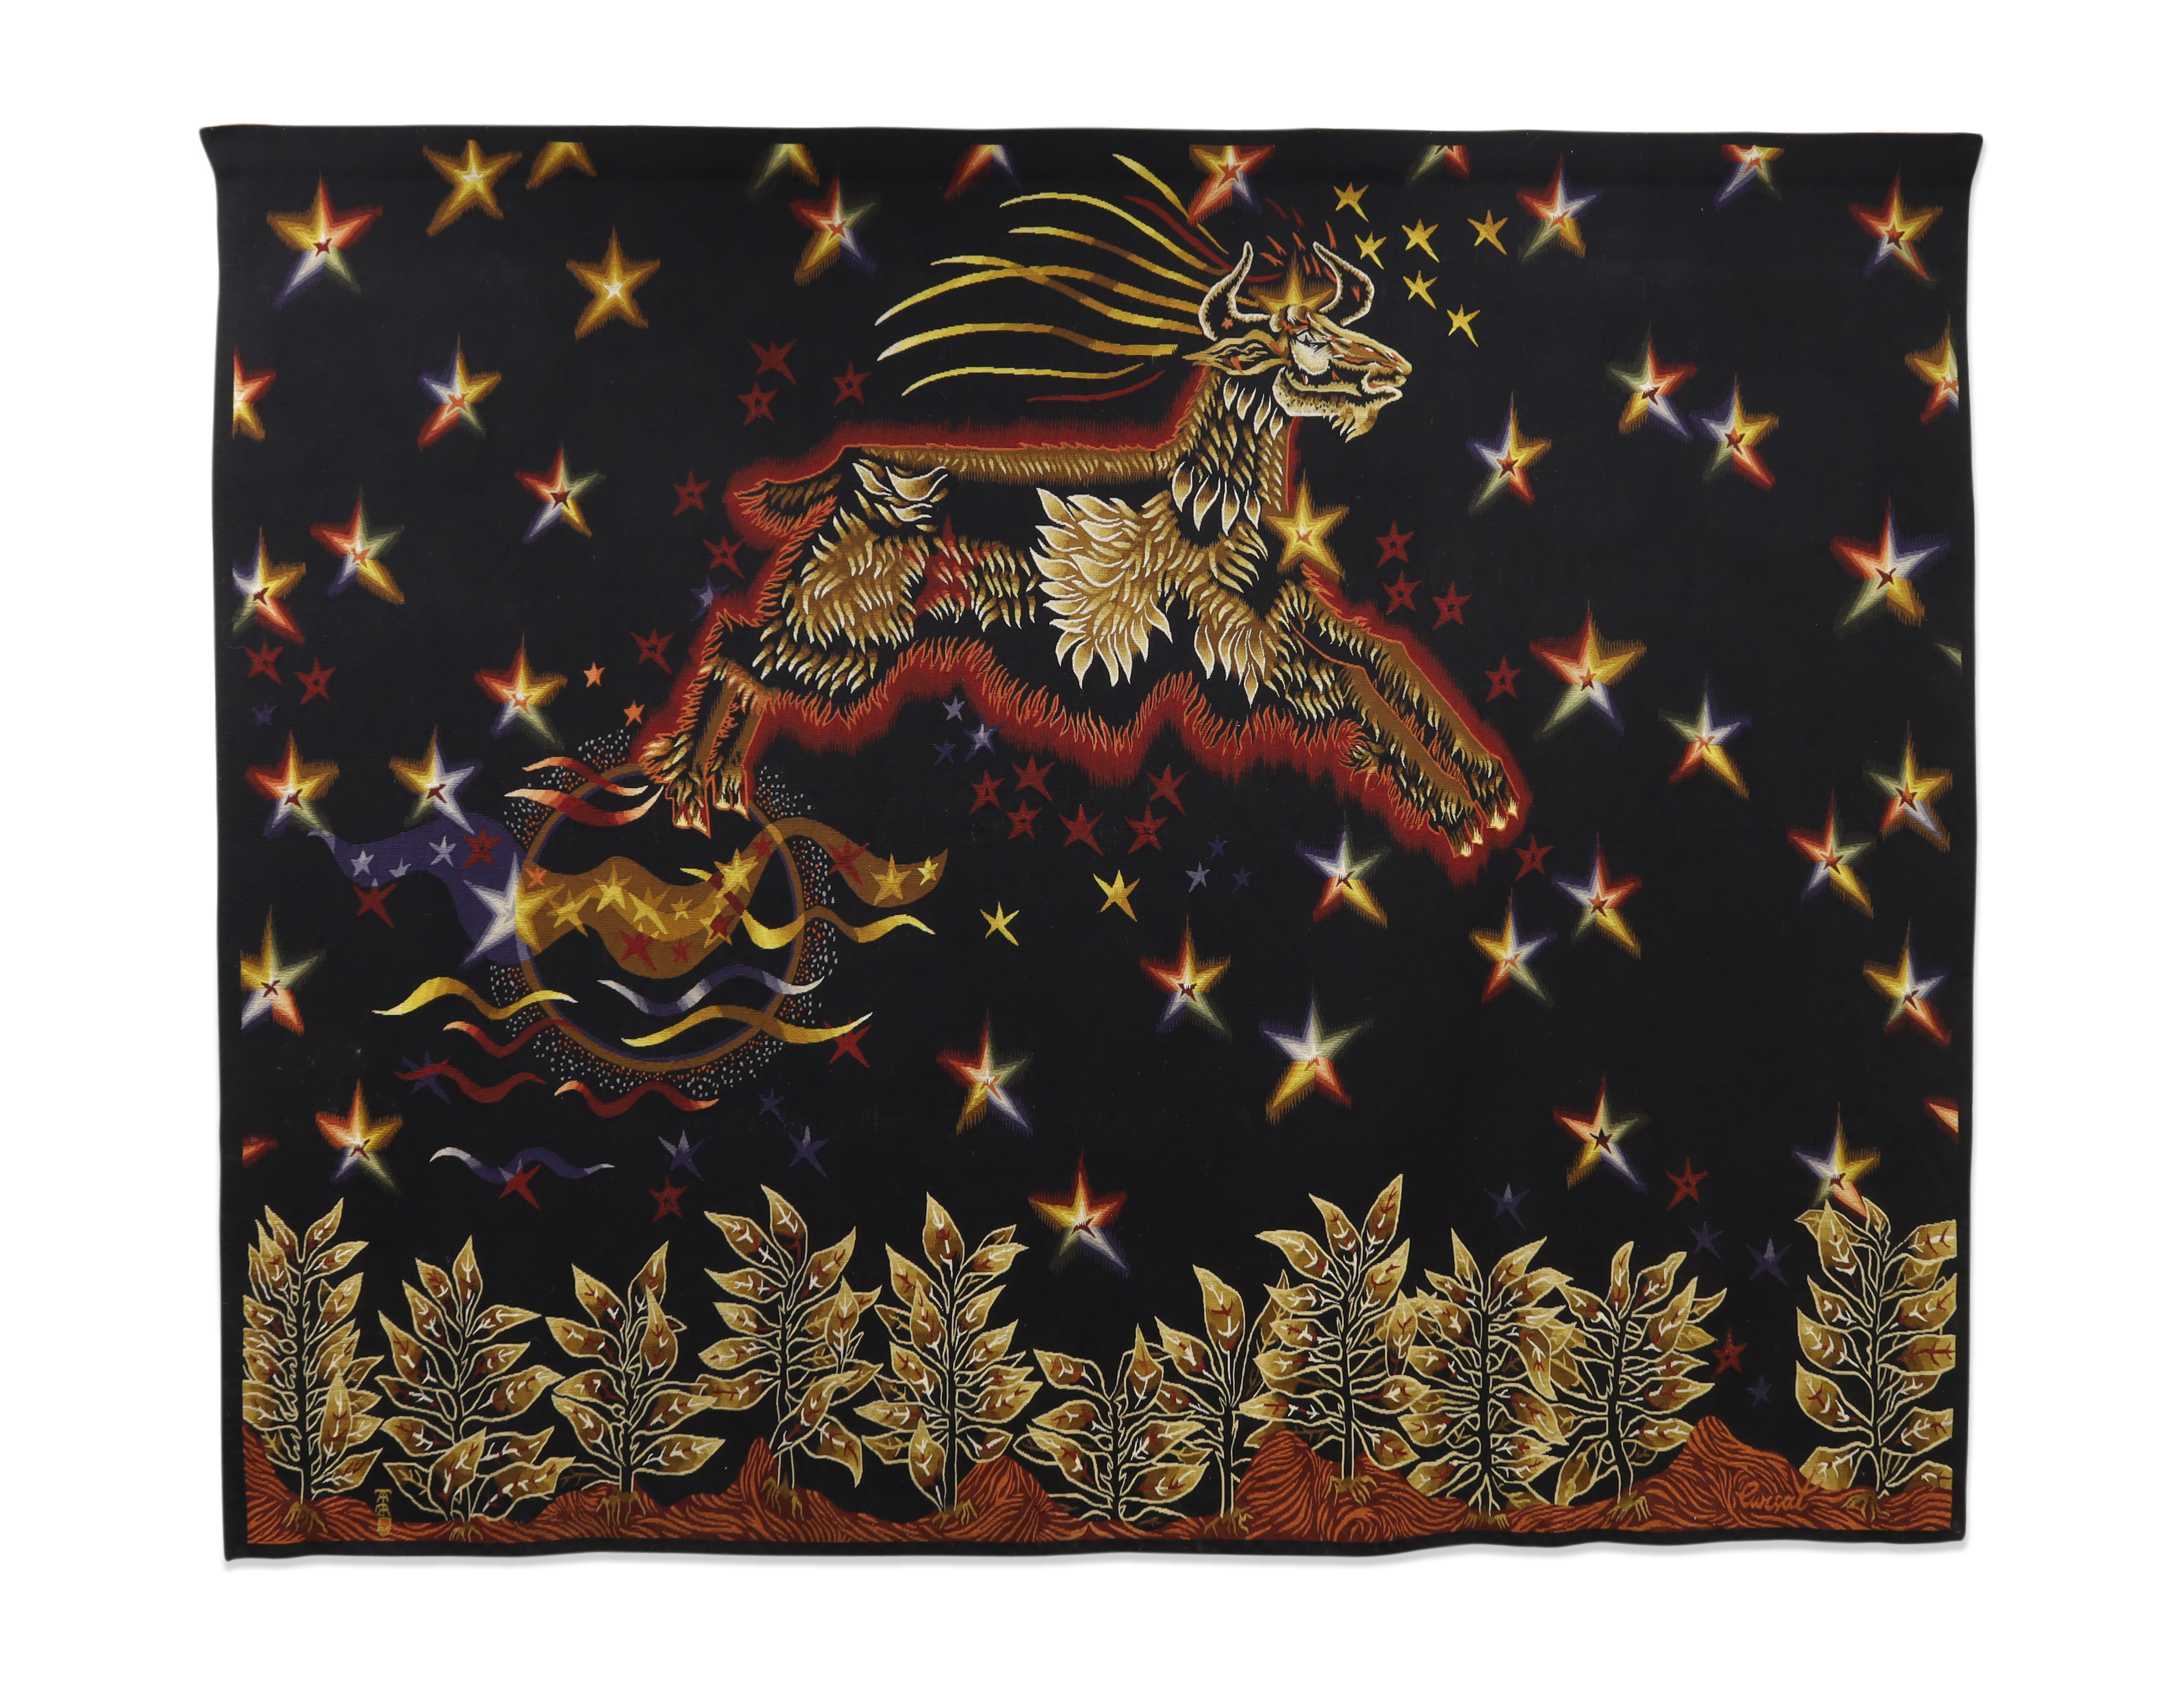 Jean Lurçat (1892-1966) for Tabard Frères & Sœurs 'Le Bouc Ocre' very large Aubusson tapestry, '...